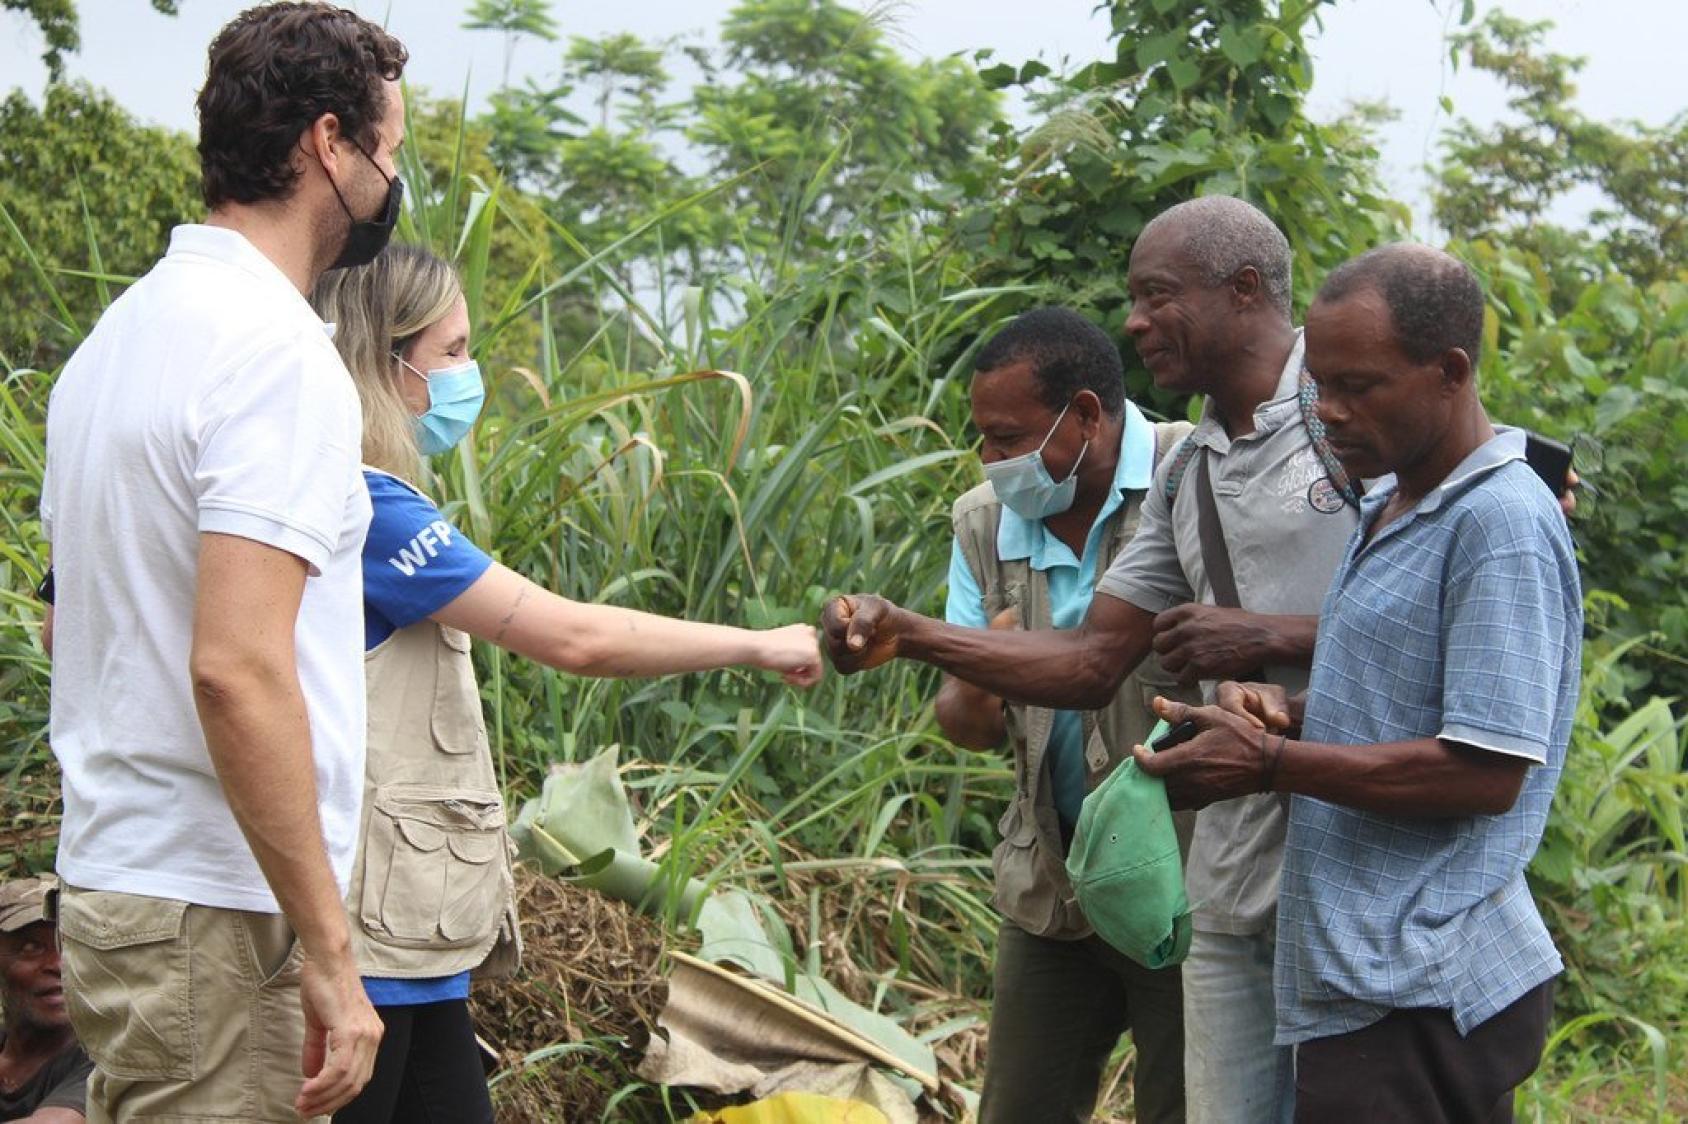 A few men, who appear to look like farmers, talk to a woman in a WFP vest and a man, in a lush green location.